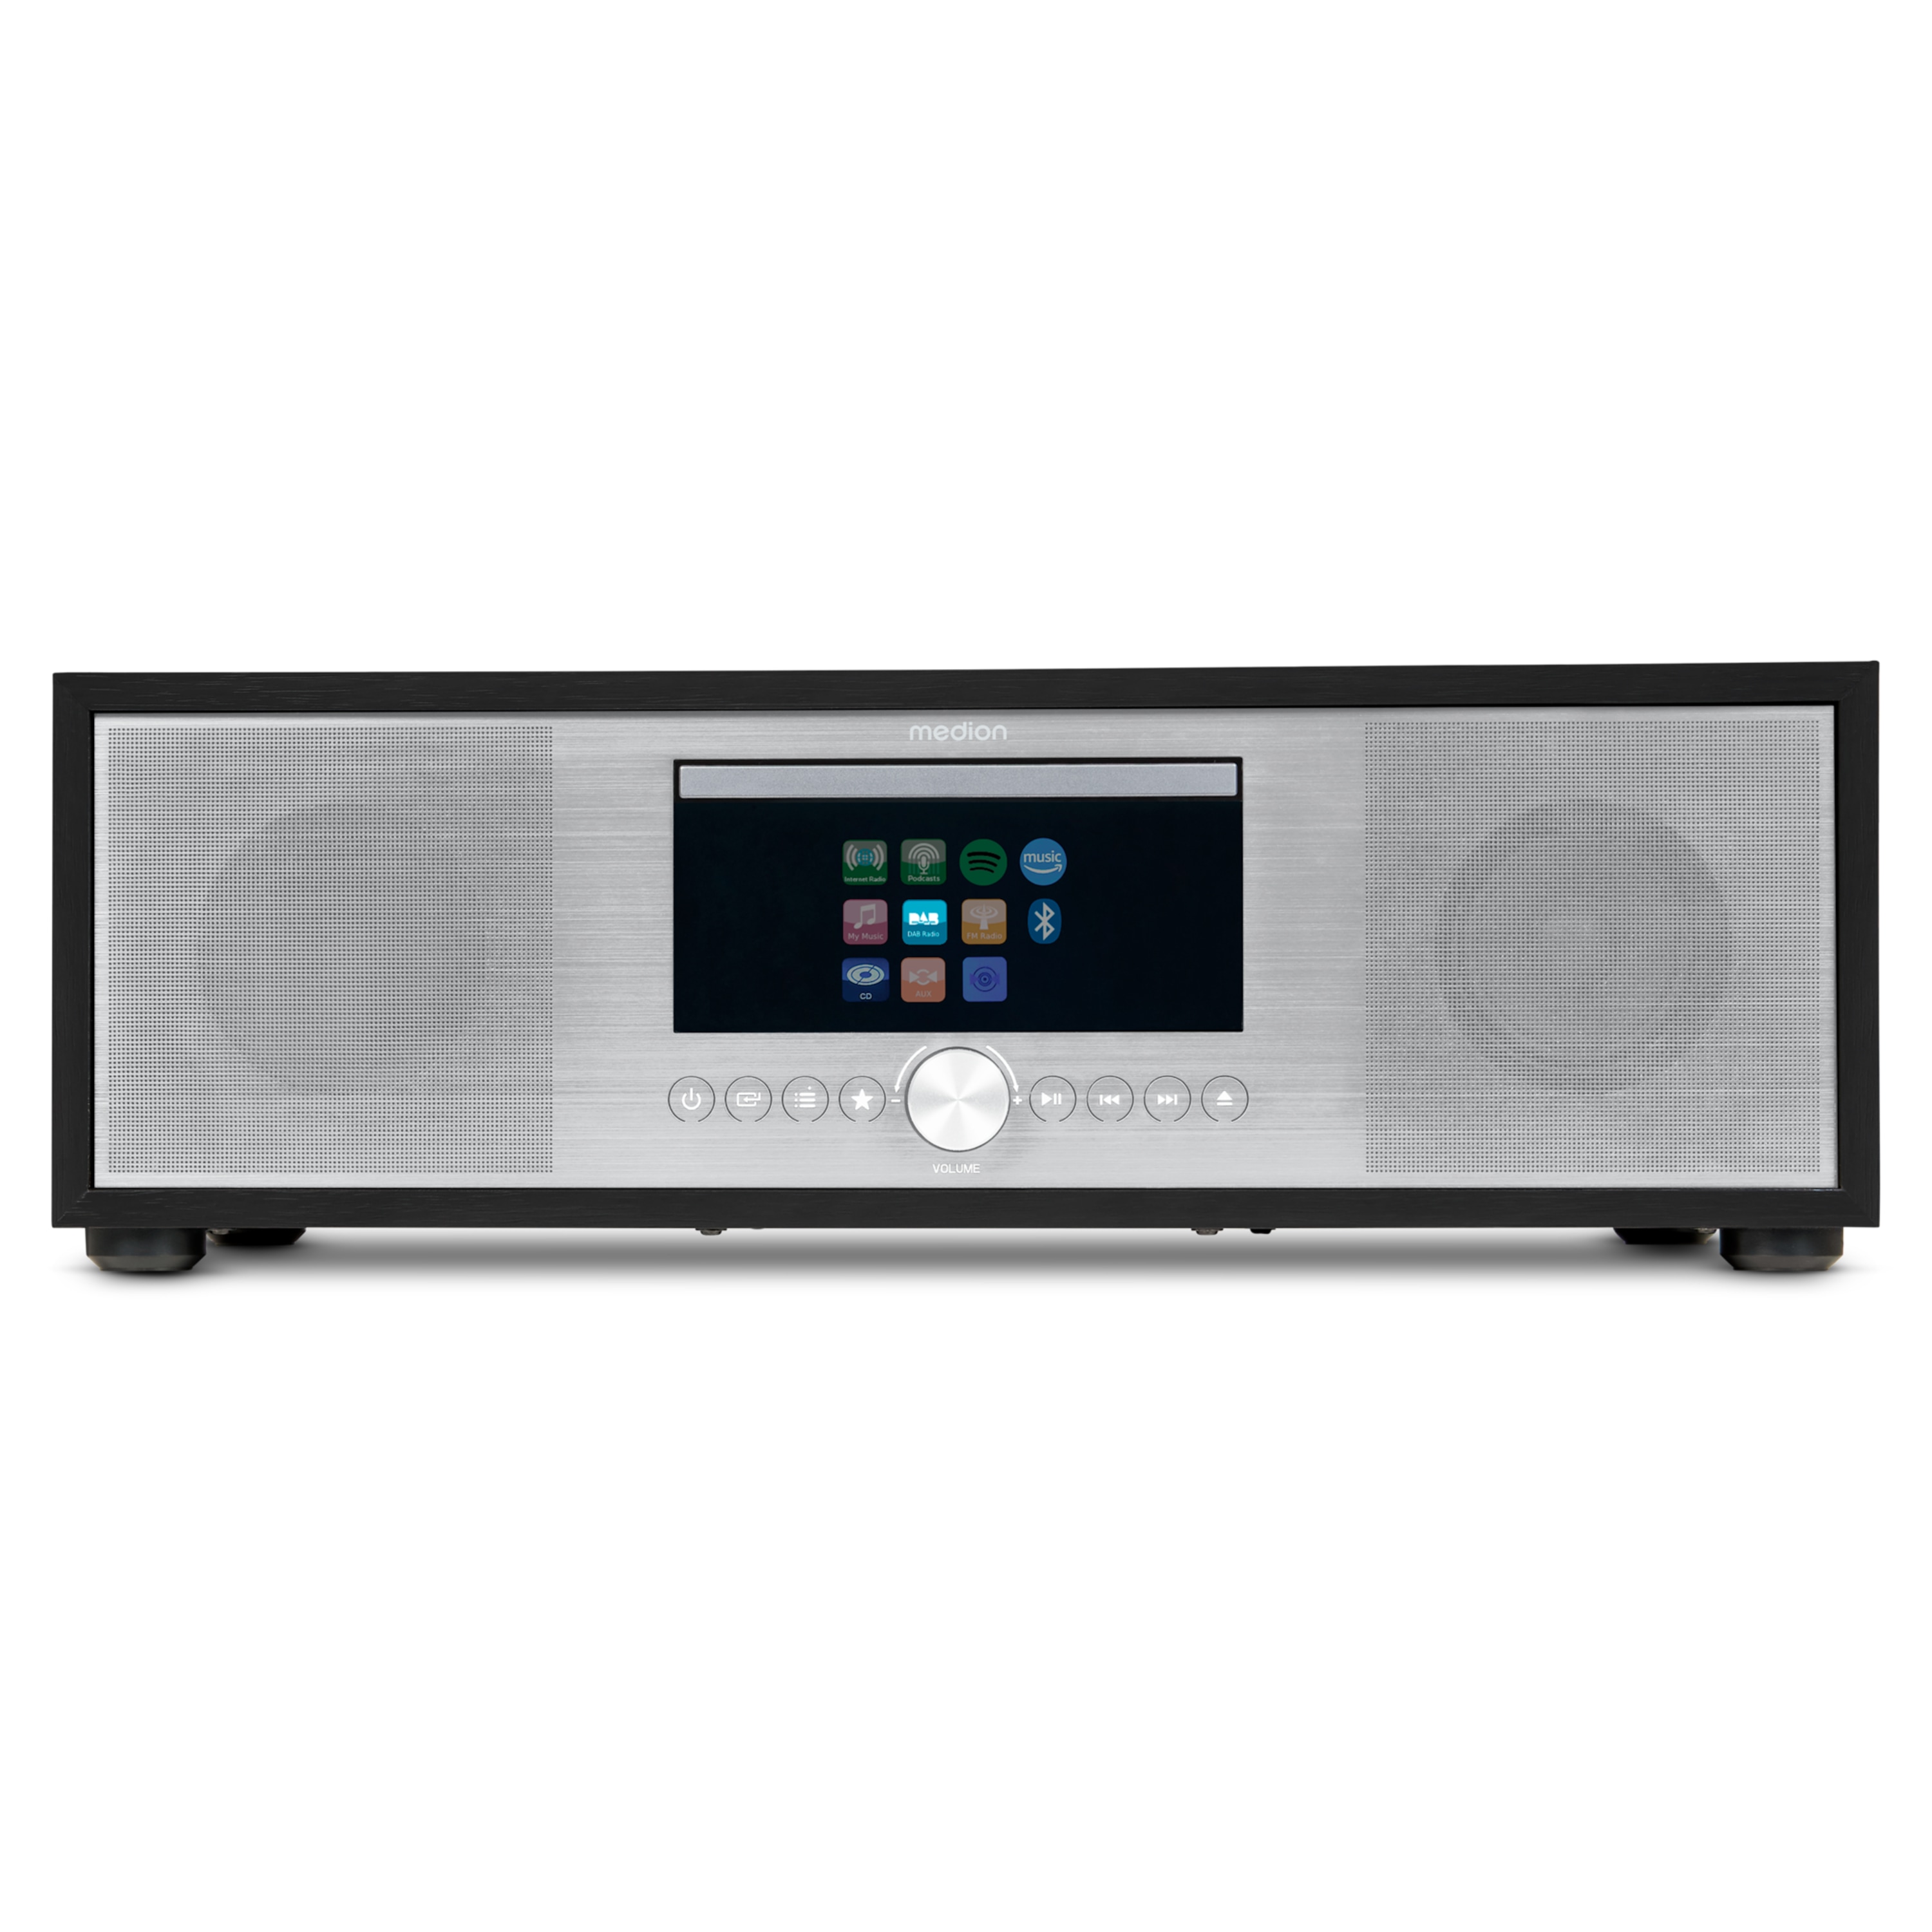 MEDION® LIFE® P66400 All-in-One Audio System silber, LCD-Display 7,1 (2.8''), Internet/DAB+/PLL-UKW Radio, CD/MP3-Player, Bluetooth®, WLAN, RDS, 2.1 Soundsystem, 2 x 20 W + 40 W RMS